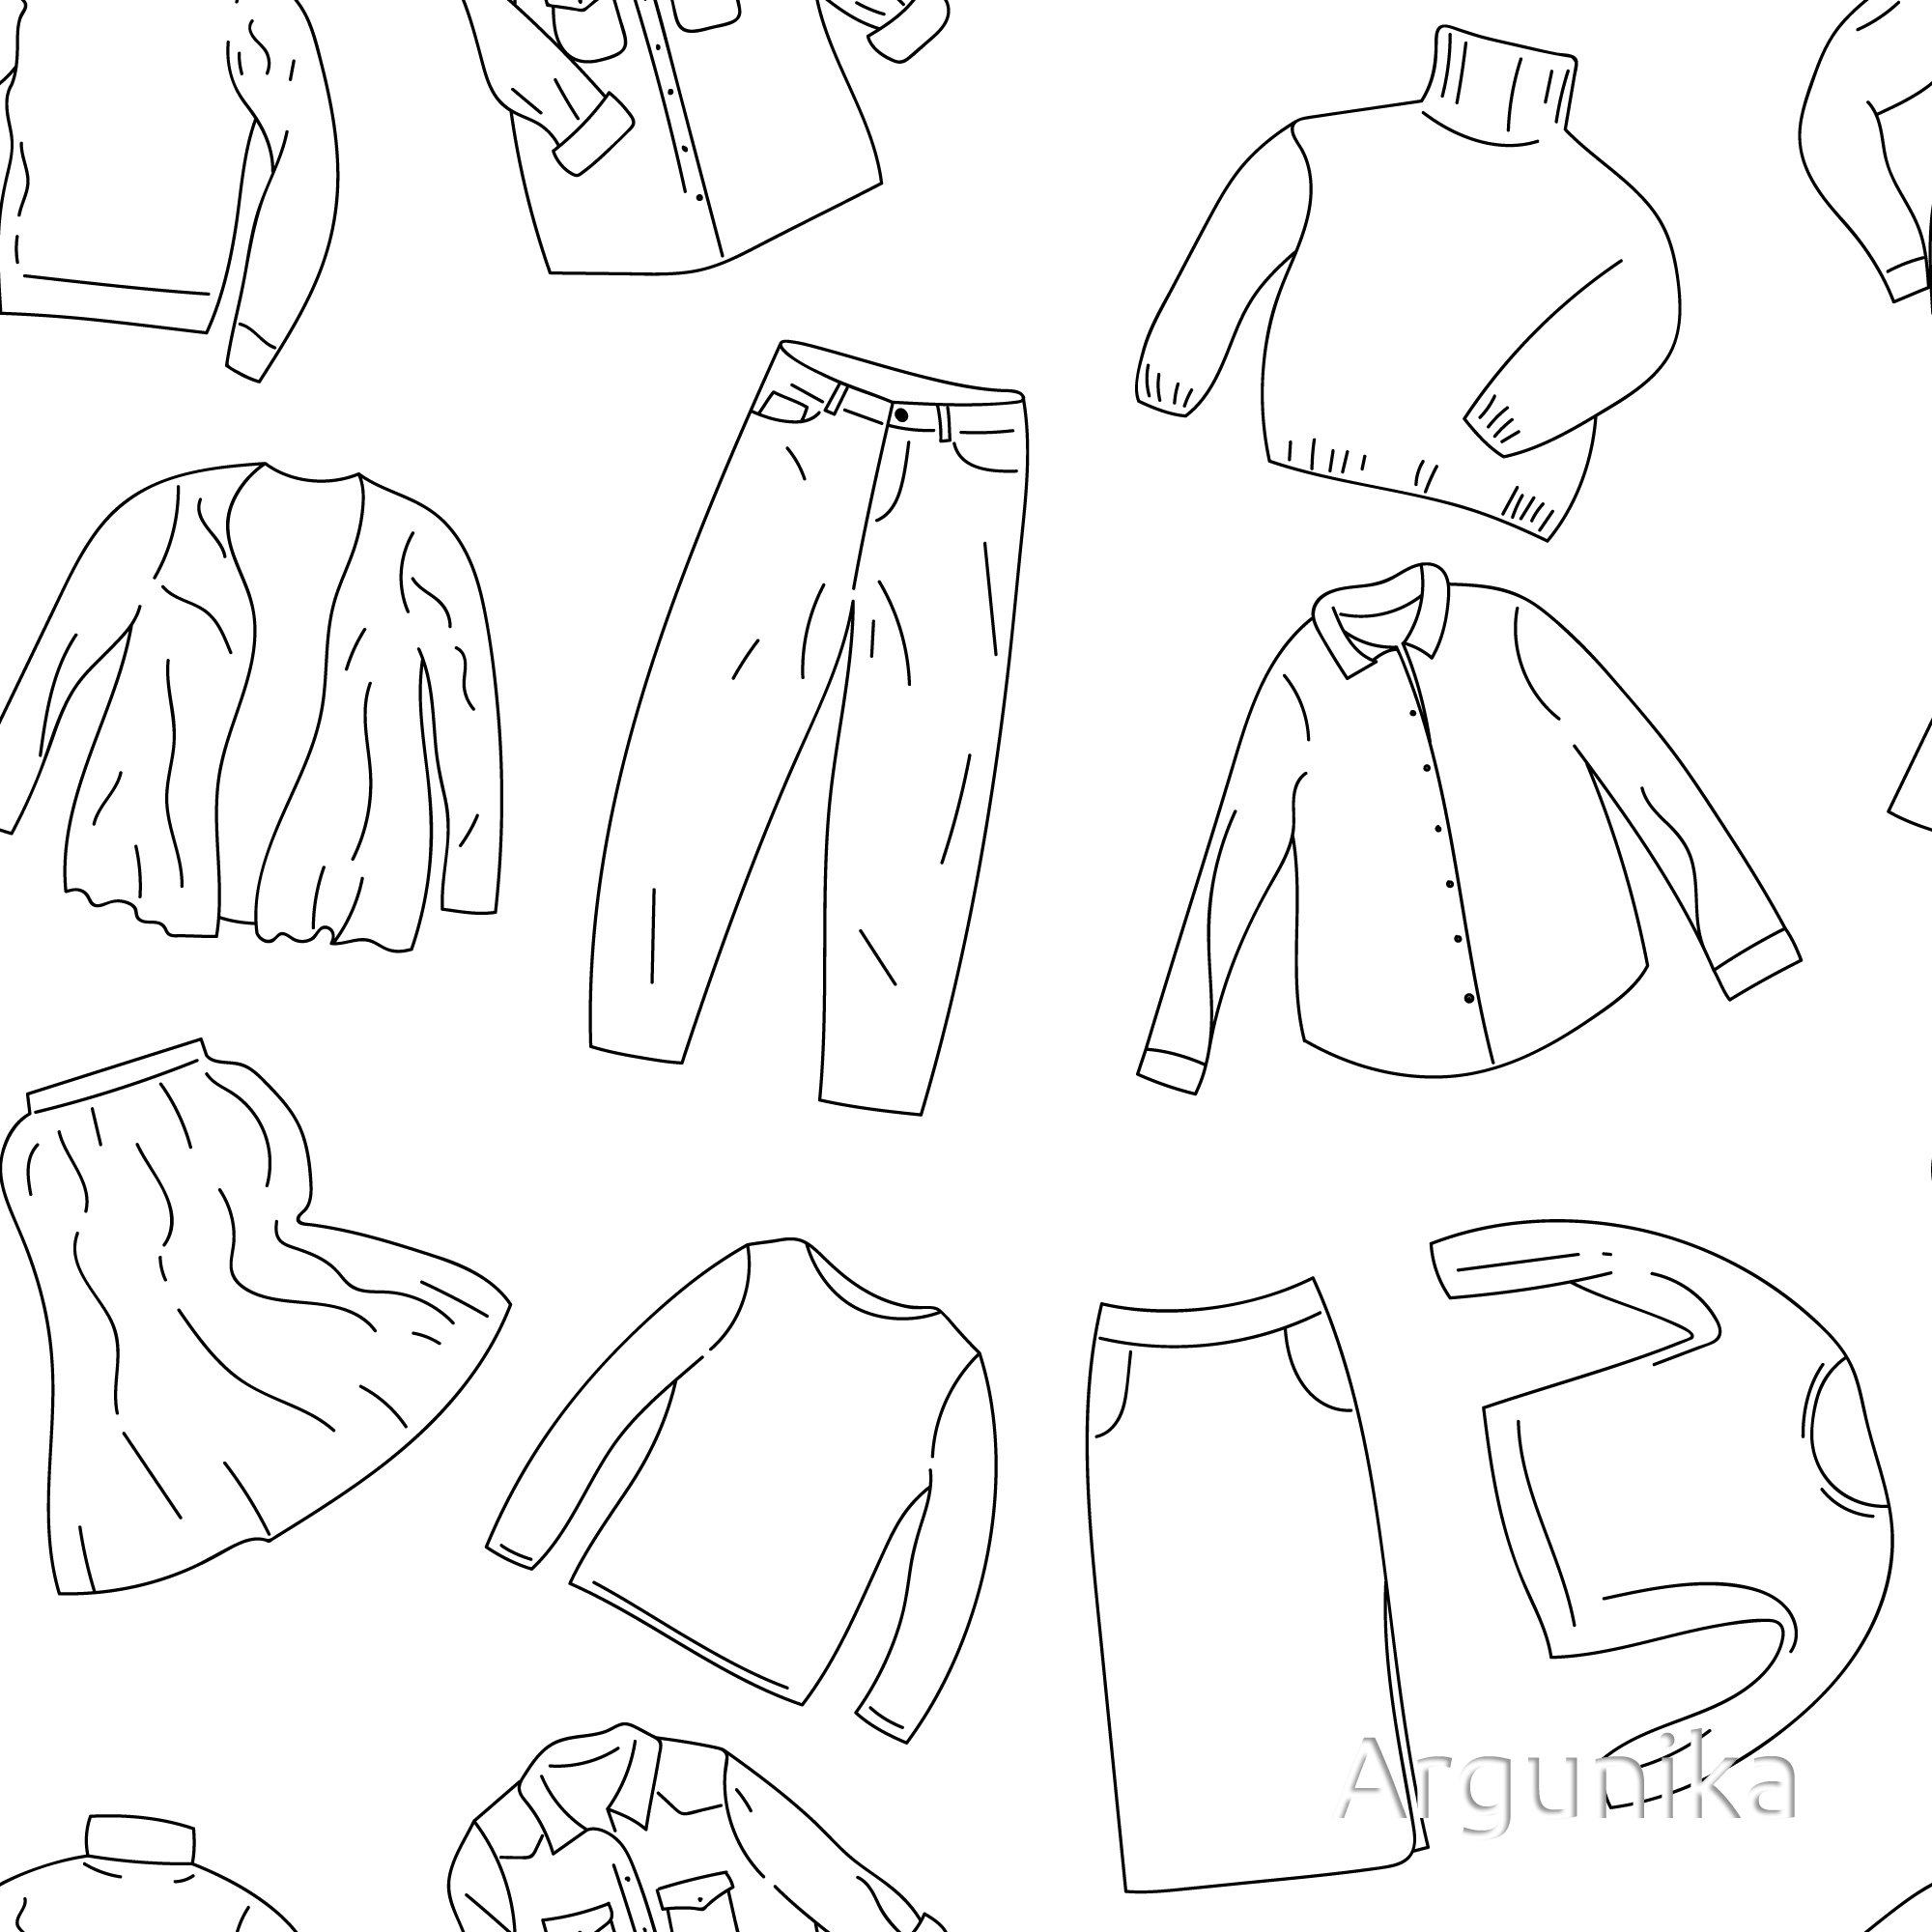 Clothes pattern an 2 orig